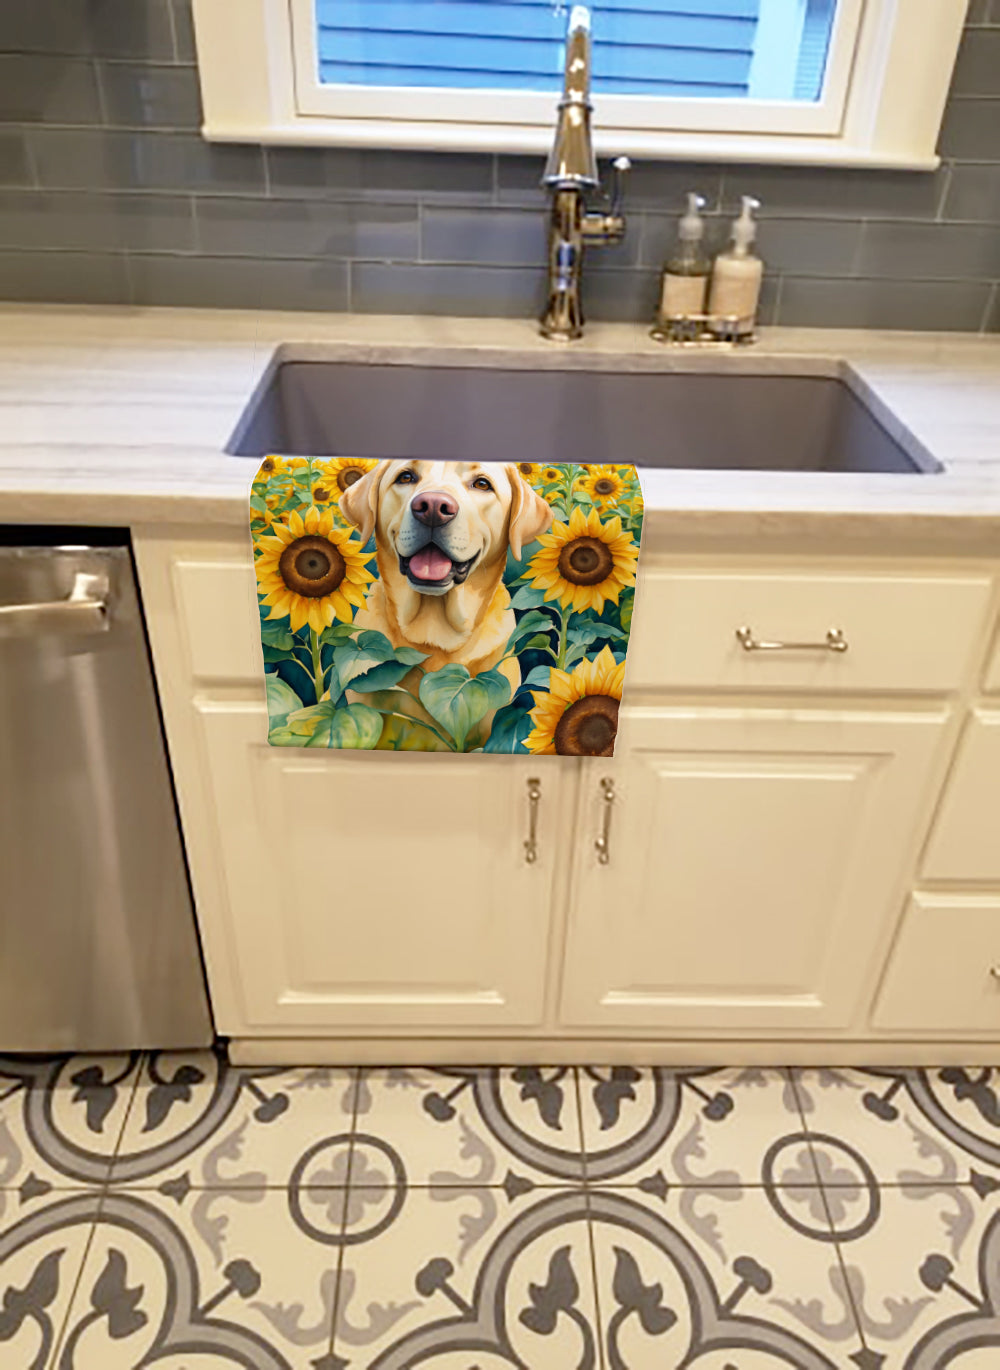 Buy this Labrador Retriever in Sunflowers Kitchen Towel